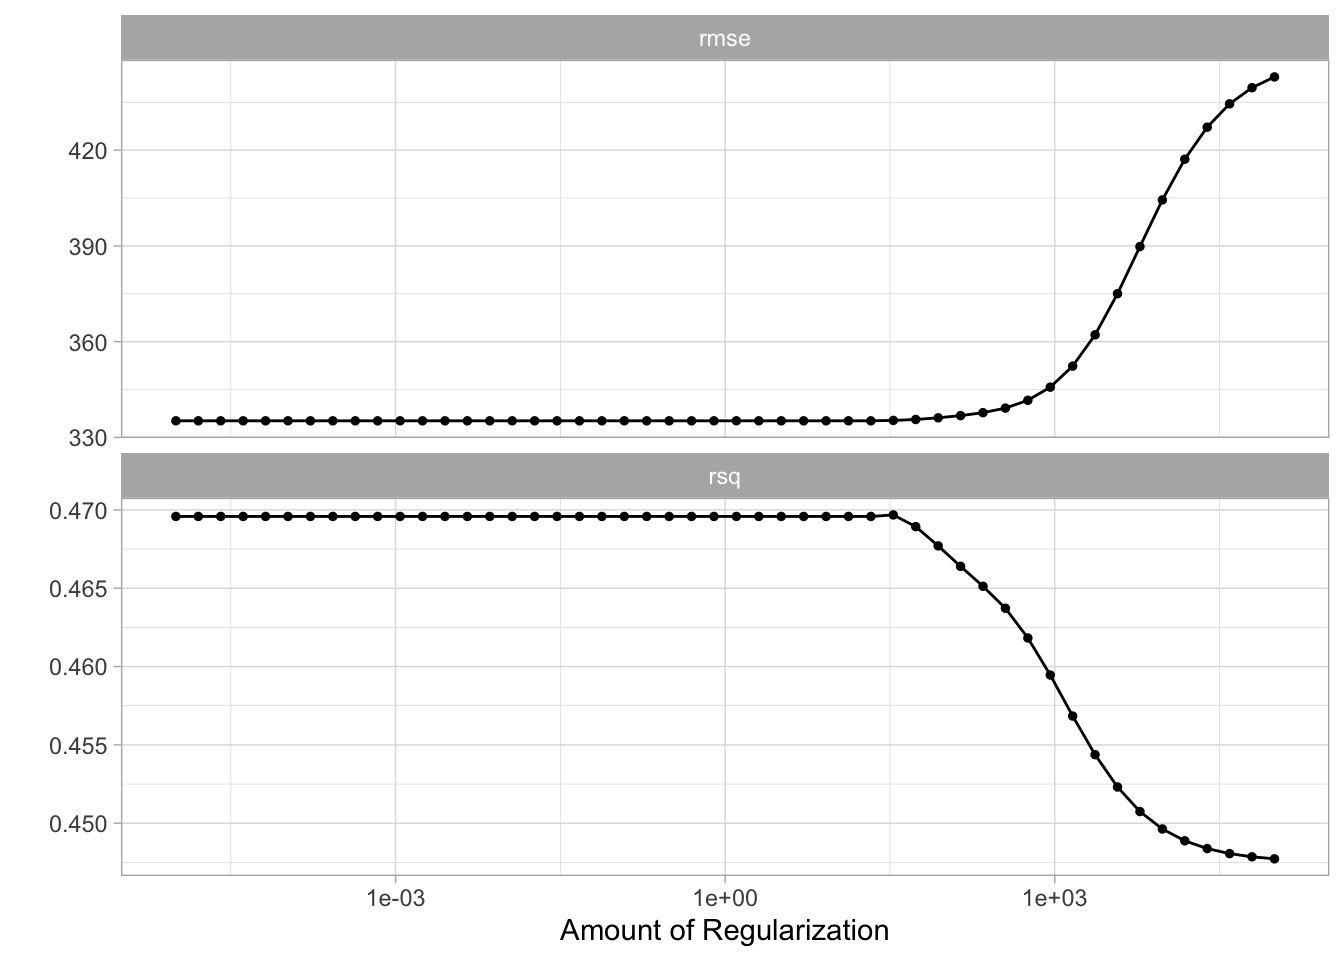 Facetted connected scatter chart. regularization along the x-axis. Performance values along the y-axis. The facets are rmse and rsq. Both are fairly constant for low values of regularization, rmse starts moderately increasing and rsq starts moderately decreasing once the regularization gets larger.